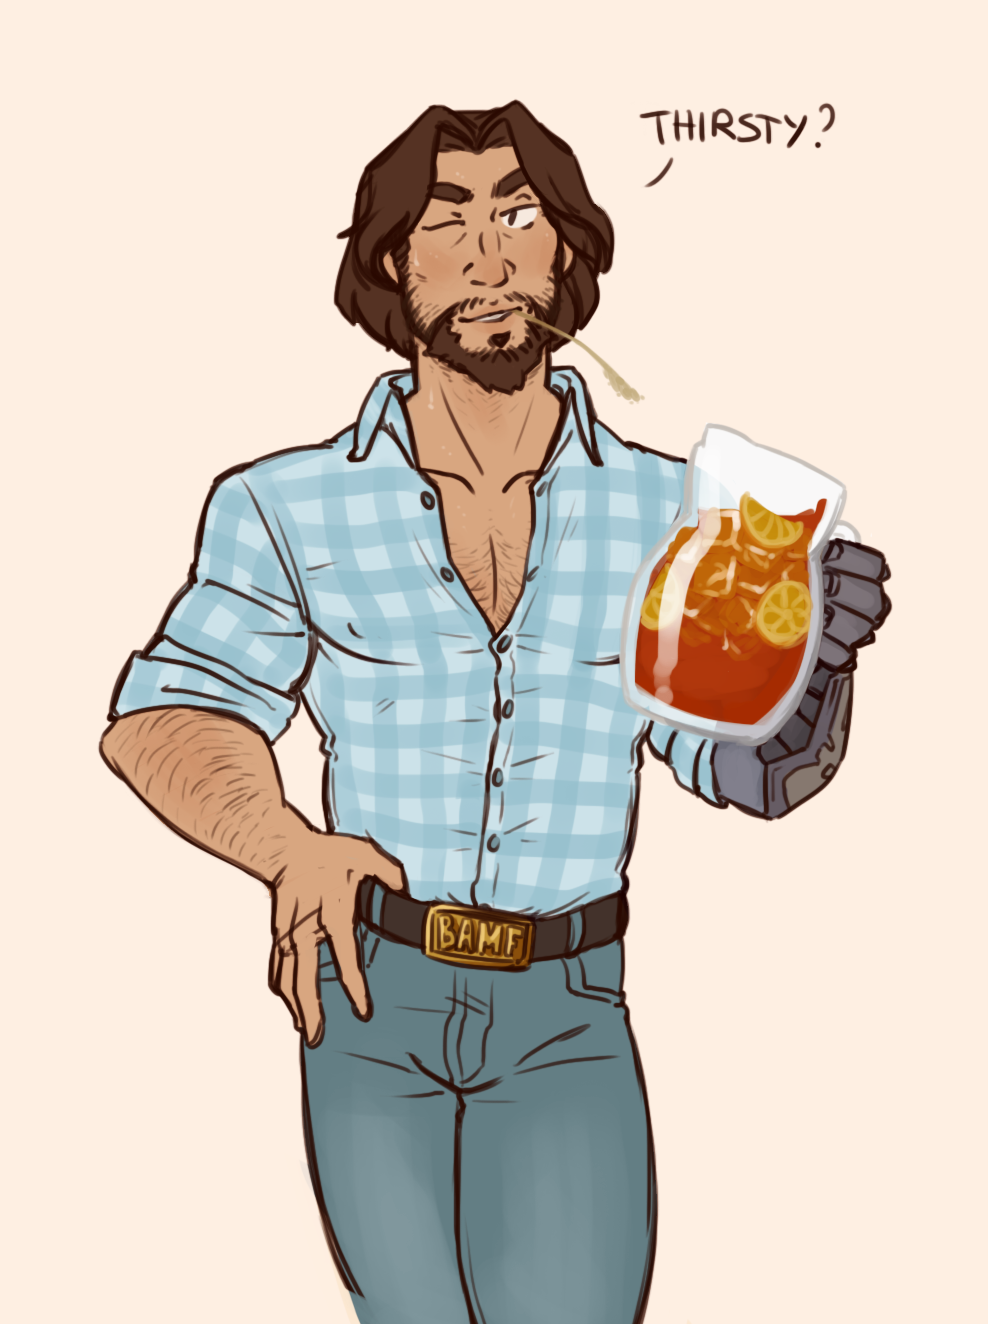 mccree is here to provide relief